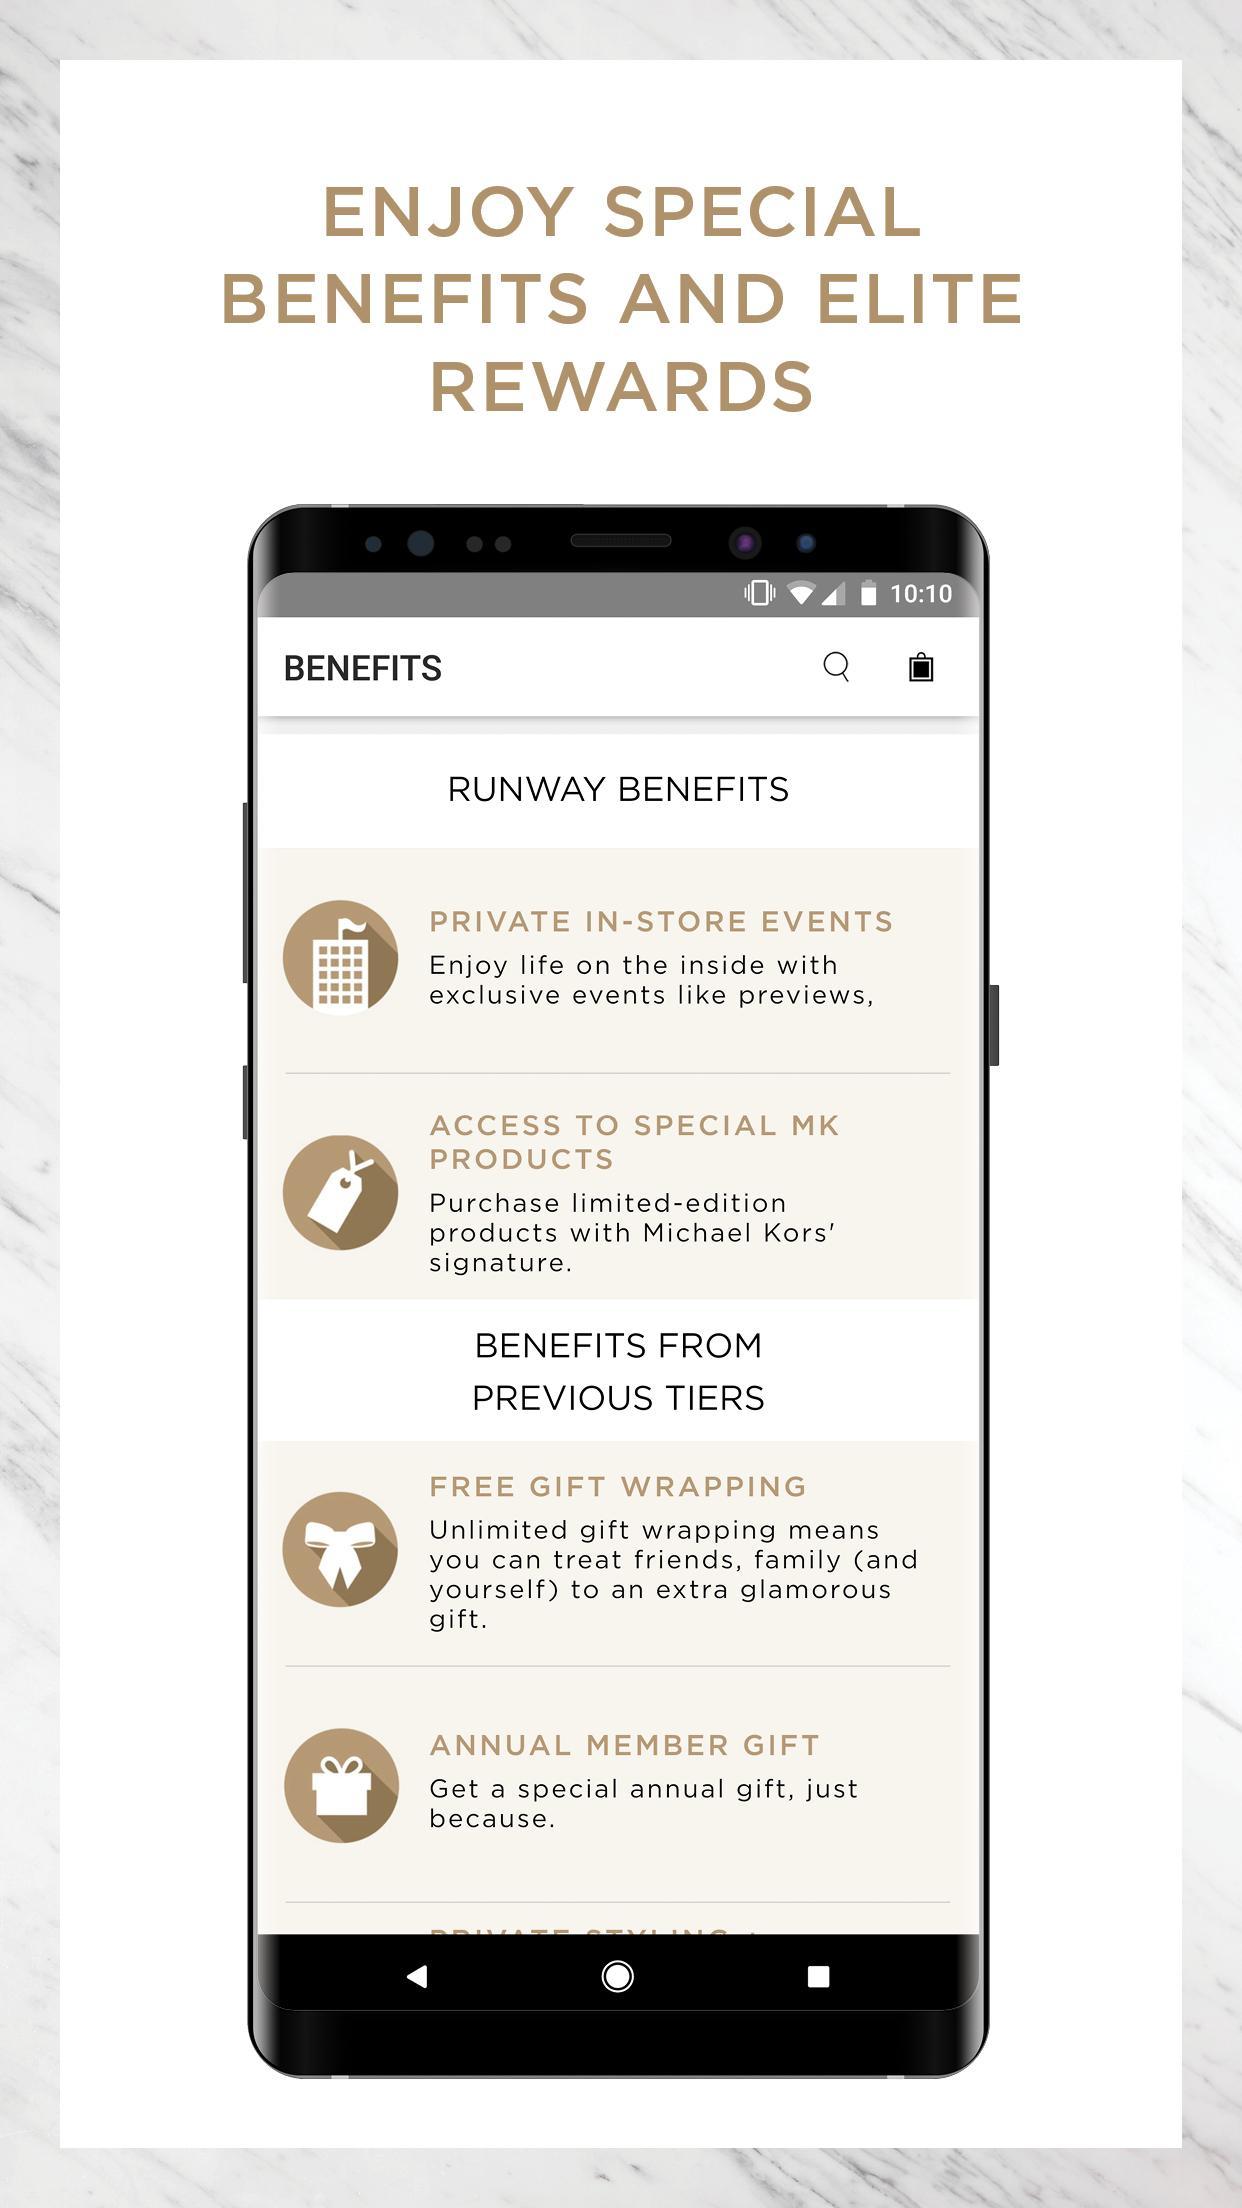 KORSVIP for Android - APK Download